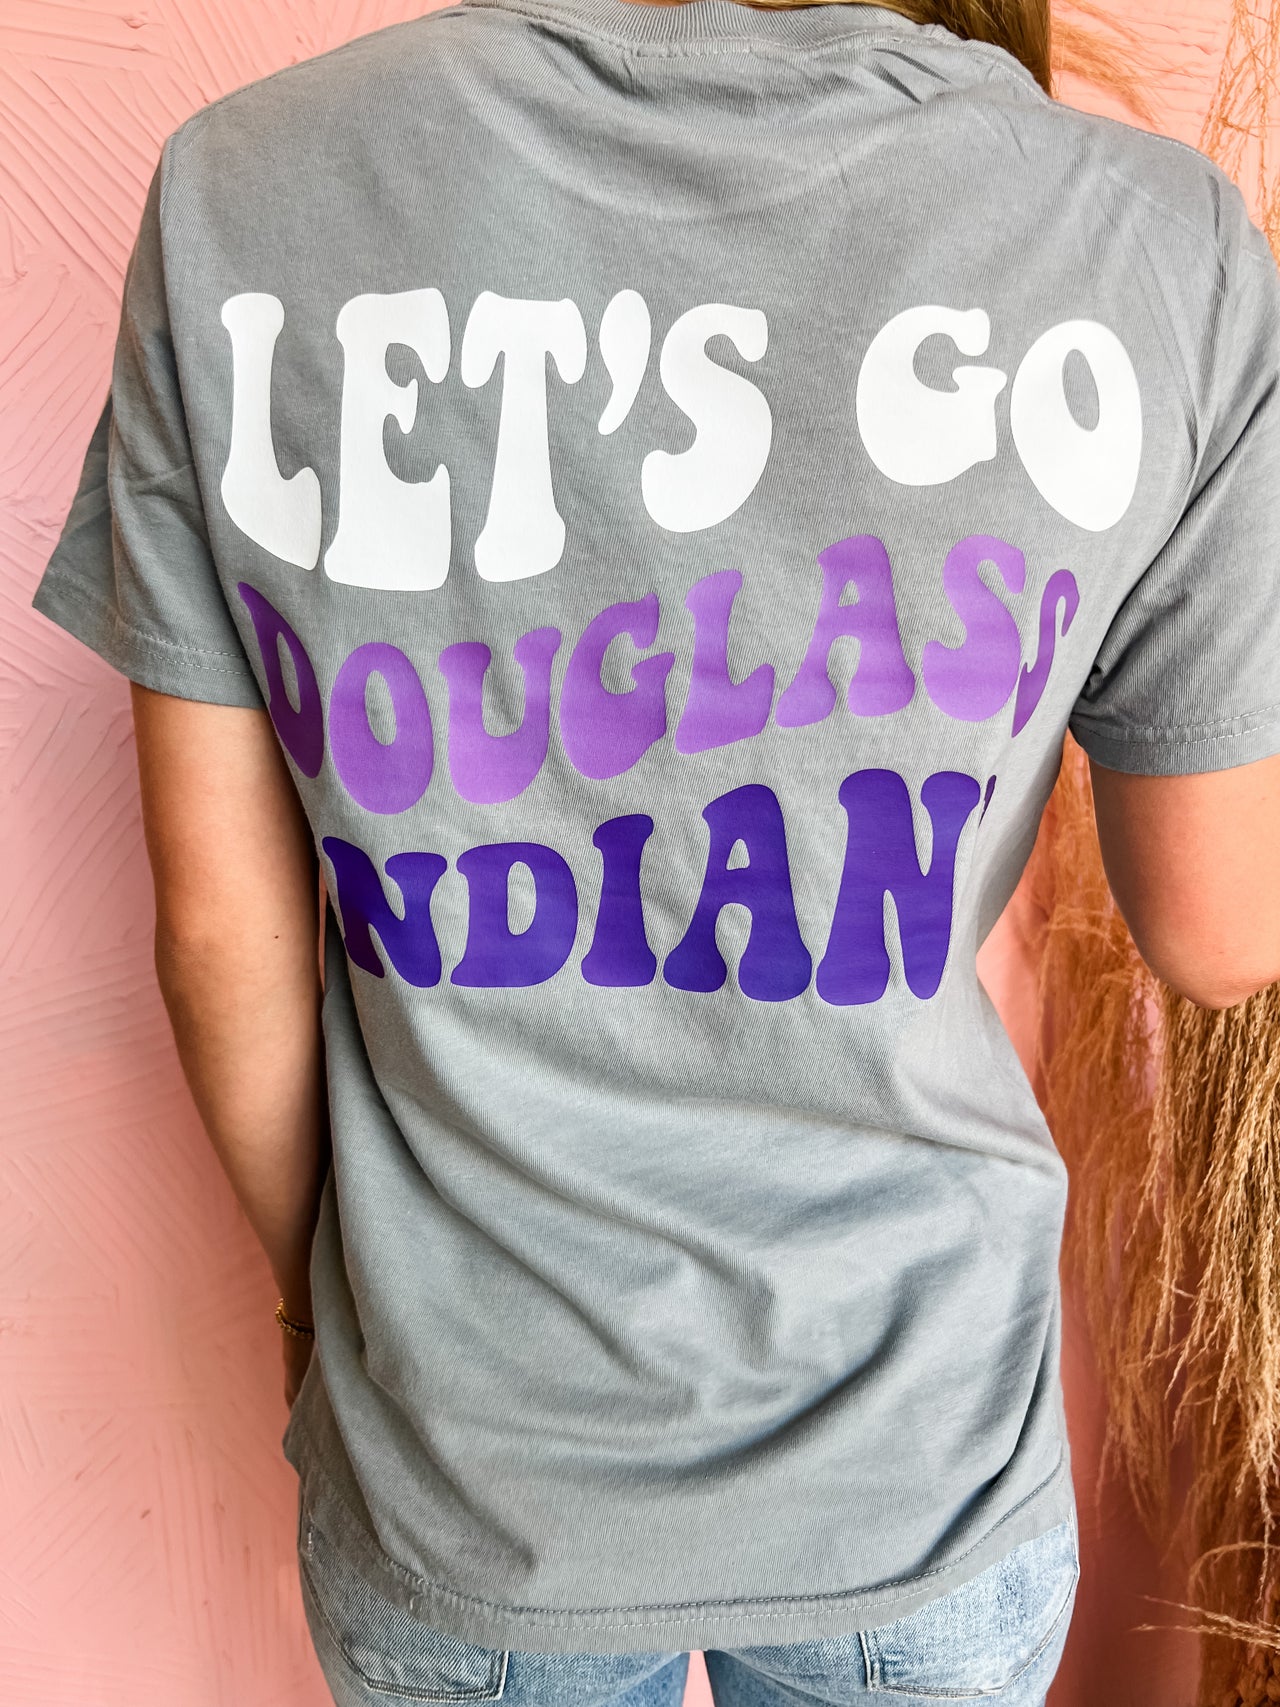 Let's Go Douglass Indians- Youth